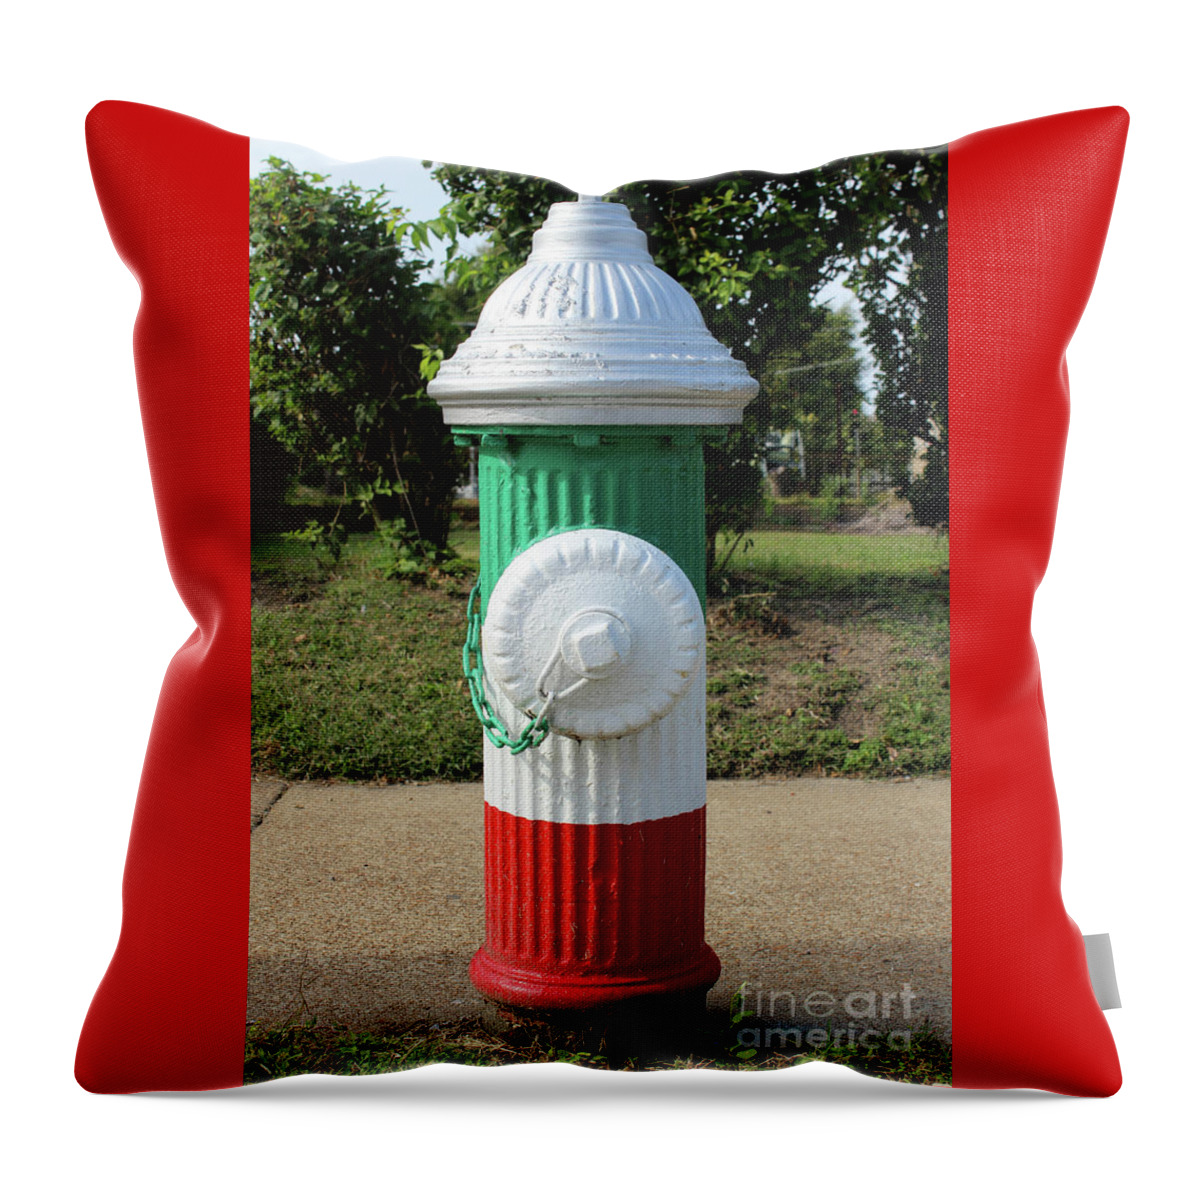 St. Louis Throw Pillow featuring the photograph Fire Hydrant on The Hill in St. Louis, Missouri by Adam Long